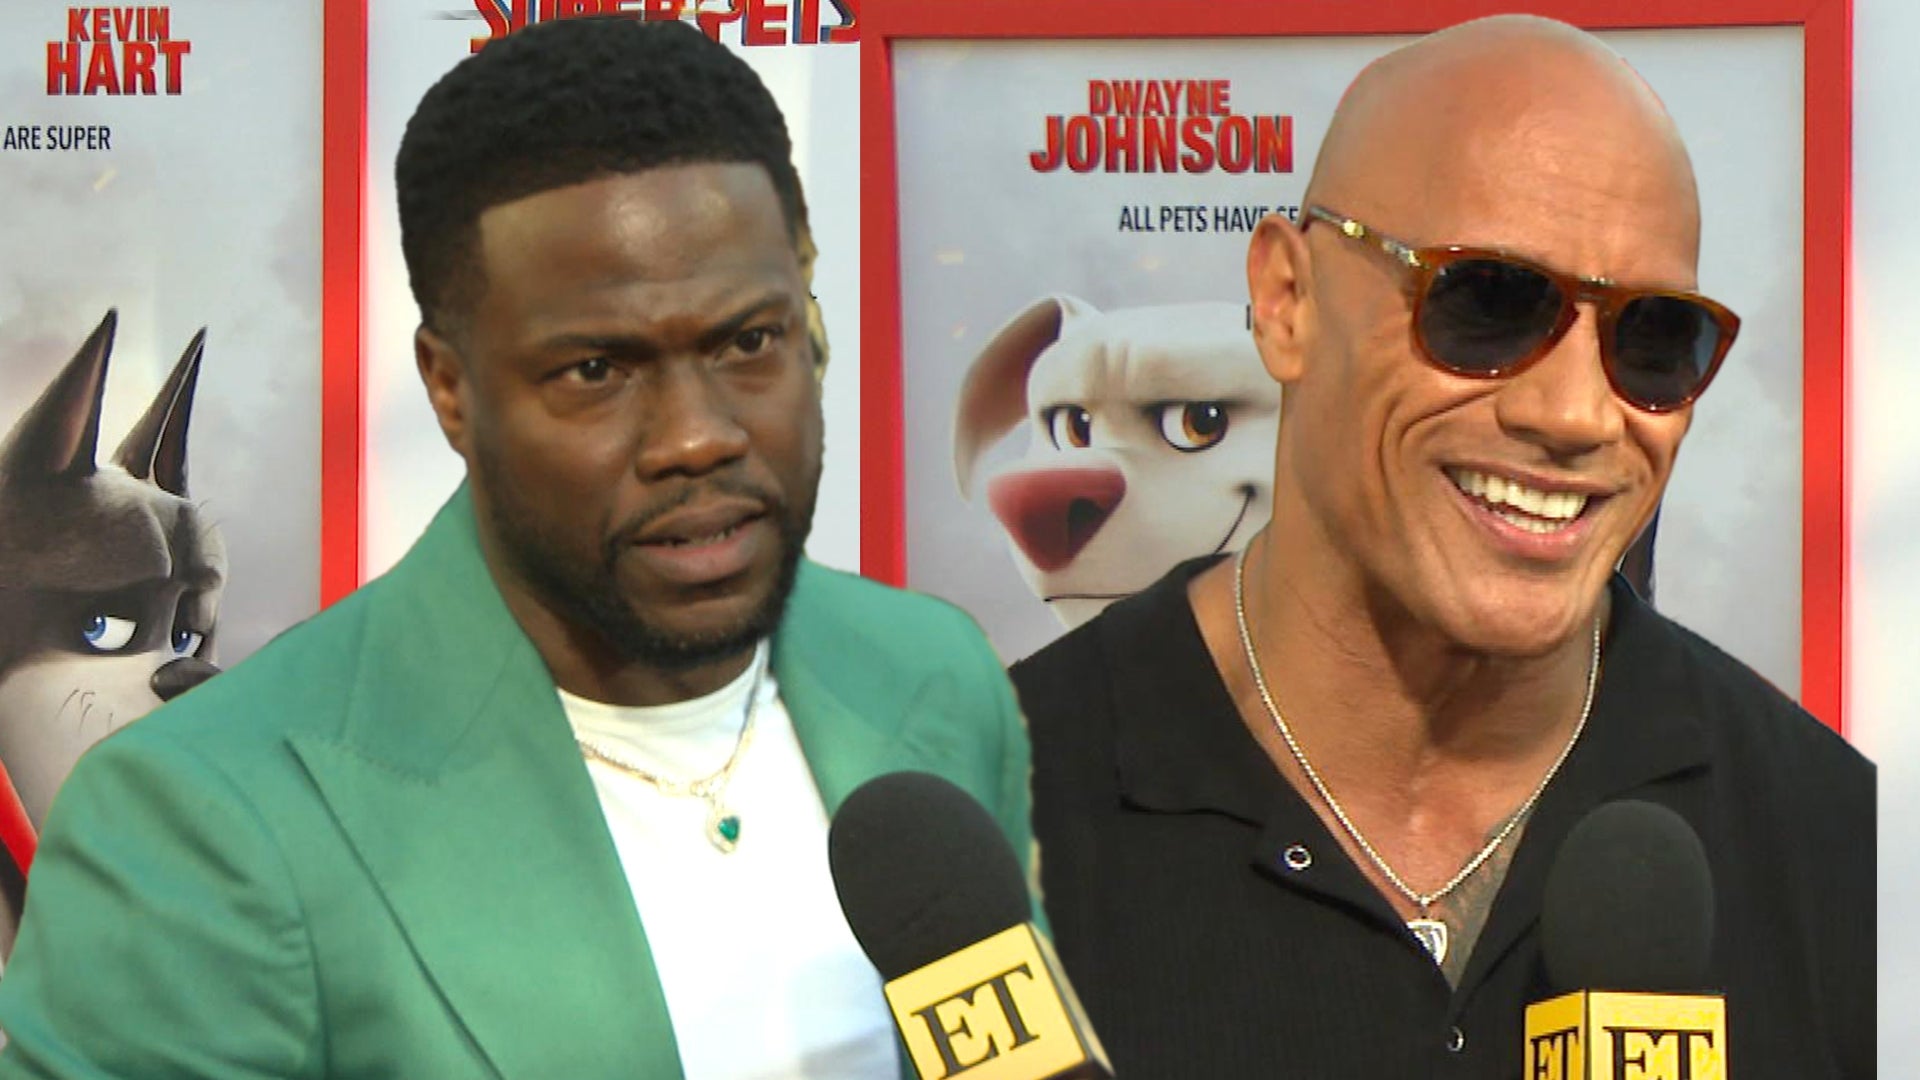 Kevin Hart and Dwayne Johnson on Teaming Up Together Again for ‘DC League of Super-Pets’ (Exclusive)